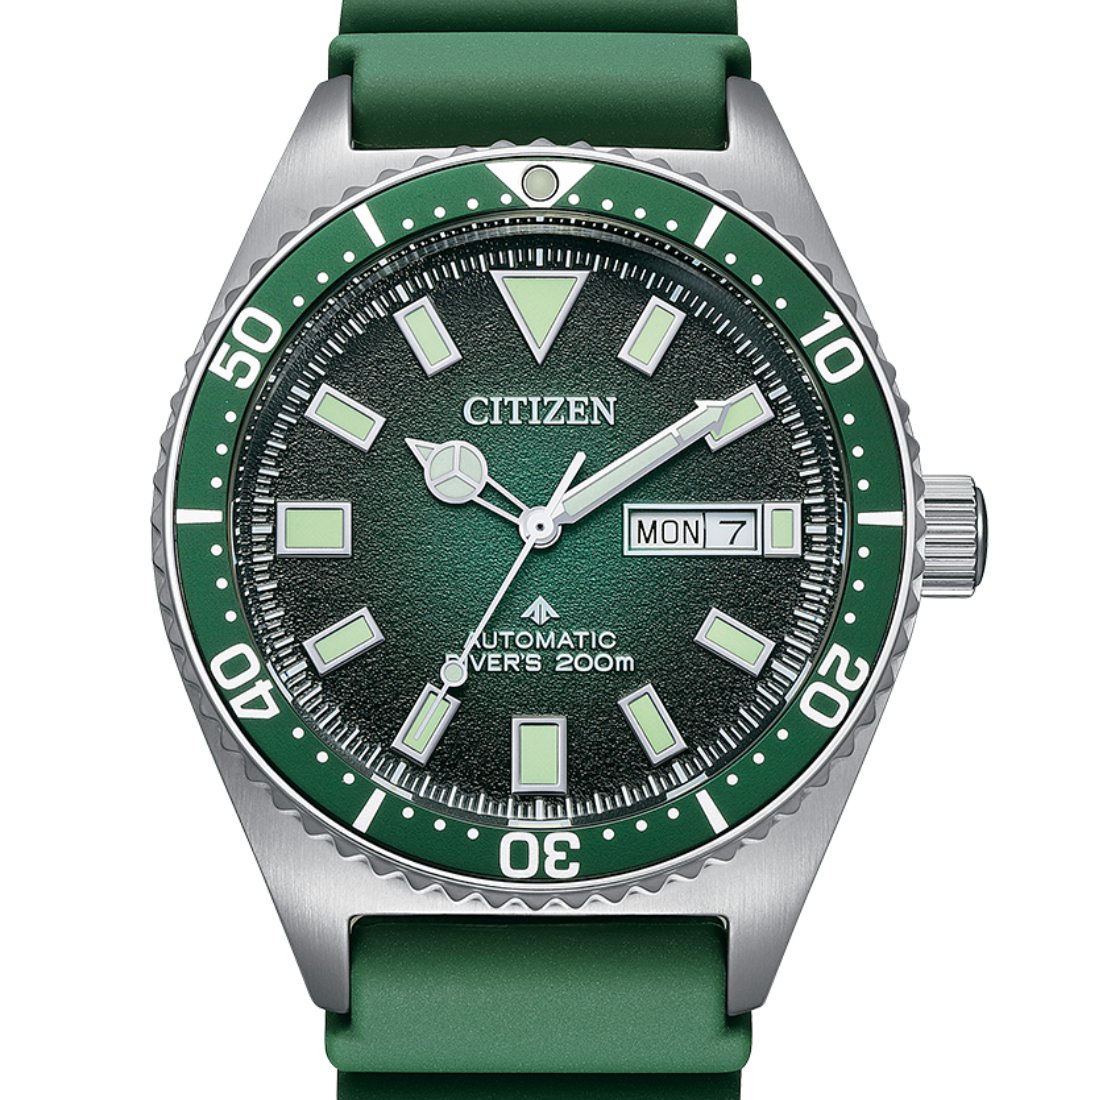 Citizen NY0121-09X Promaster Marine Divers 200m Watch -Citizen